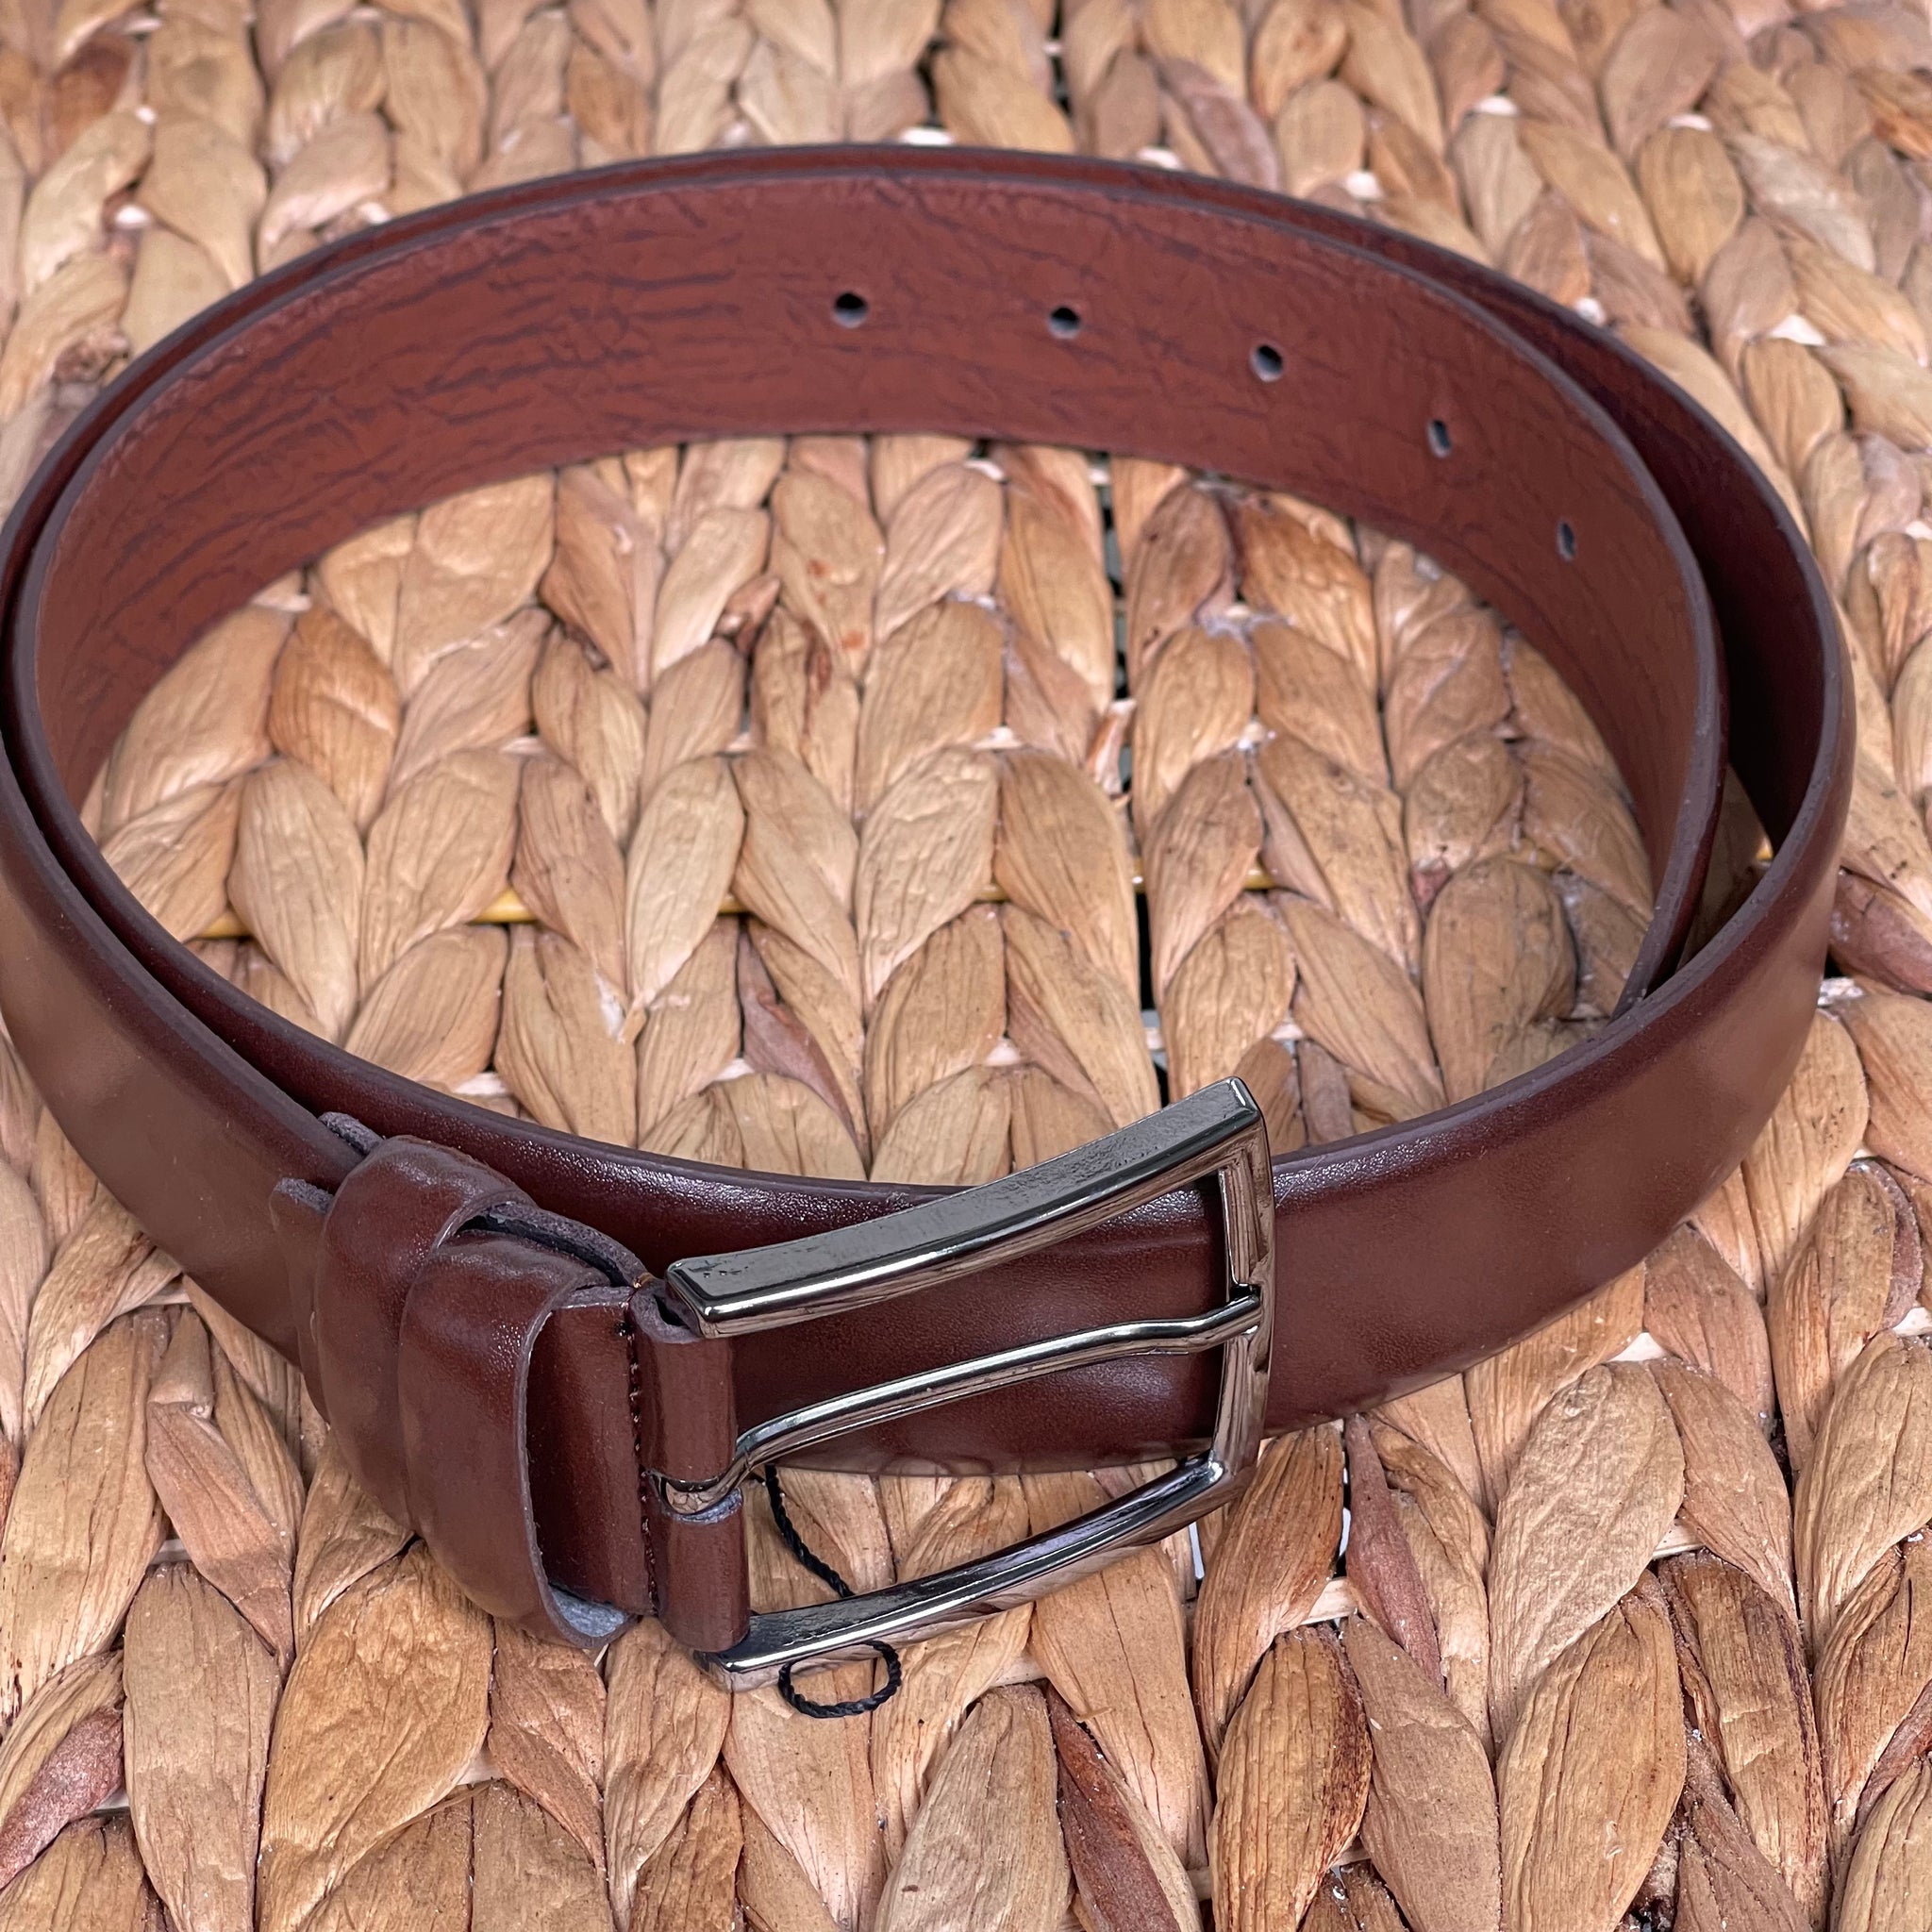 Handmade Leather Belt – The Ultimate Official Gift for Men - Color: Brown